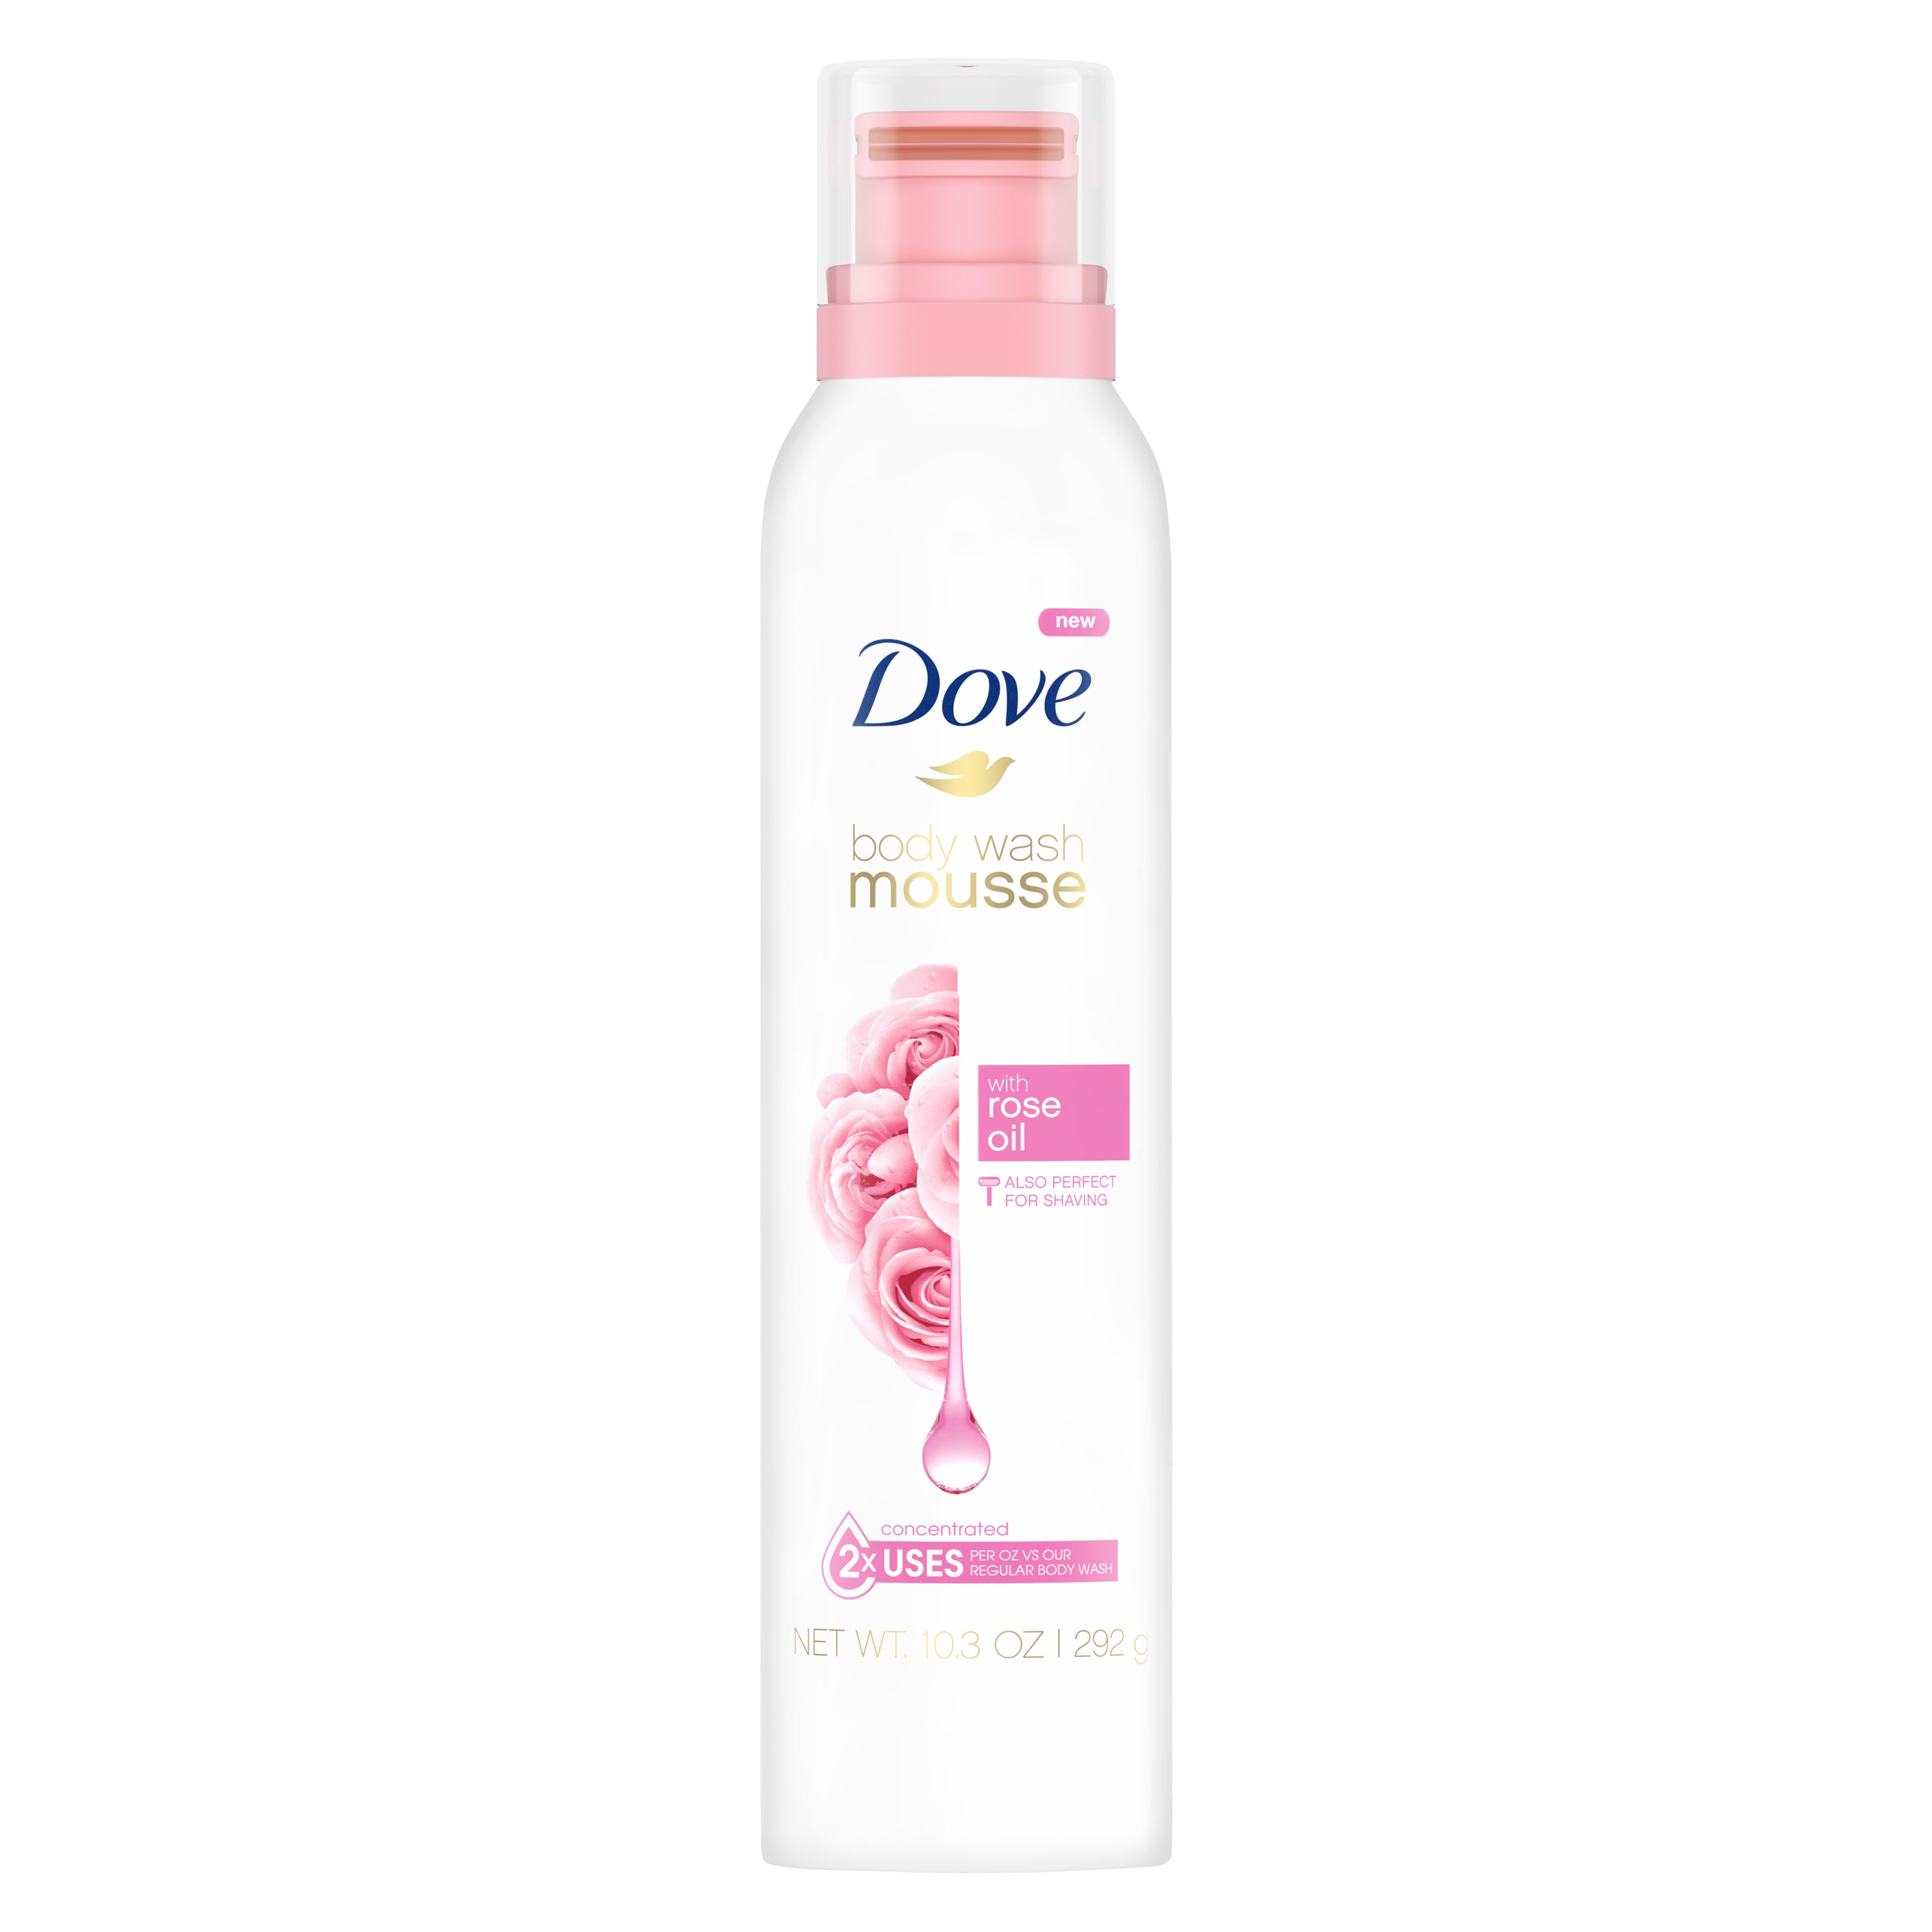 Dove Body Wash Mousse with Rose Oil, 10.3 oz - image 1 of 8